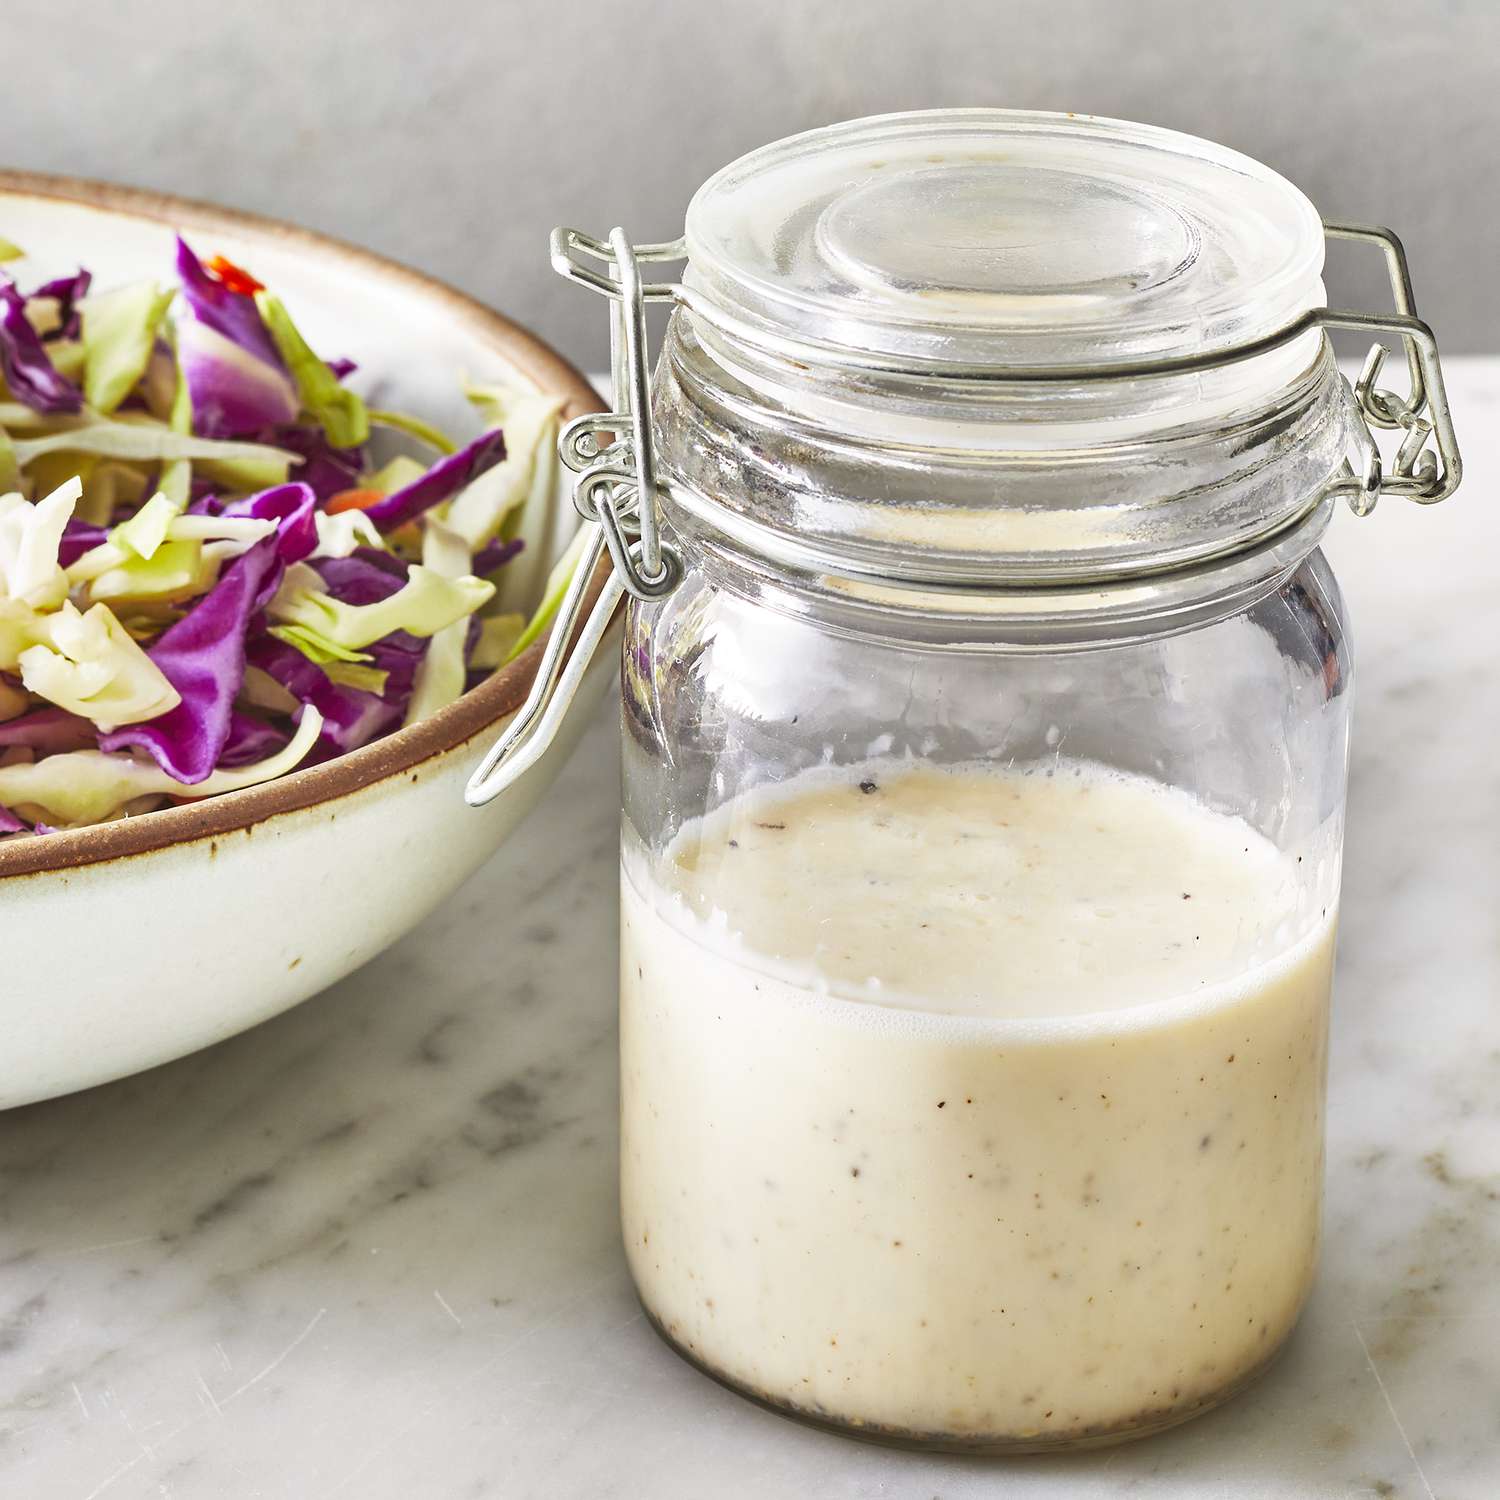 a low angle, close up view of a closed jar of coleslaw dressing with a bowl of shredded cabbage nearby